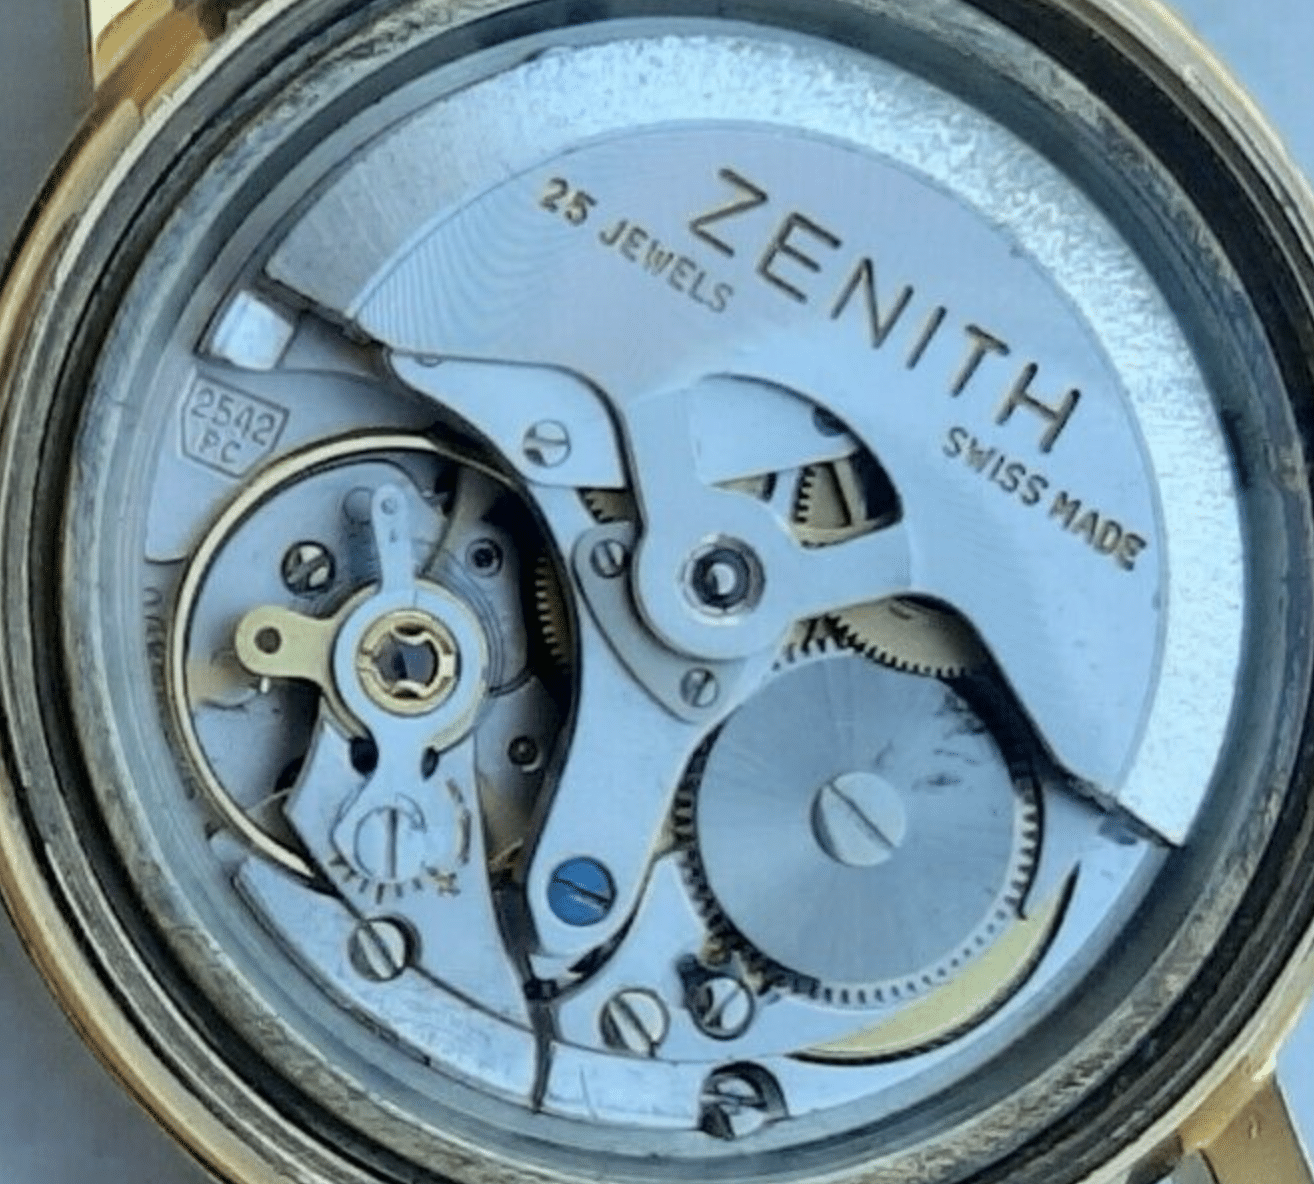 Zenith caliber 2542PC movement specifications